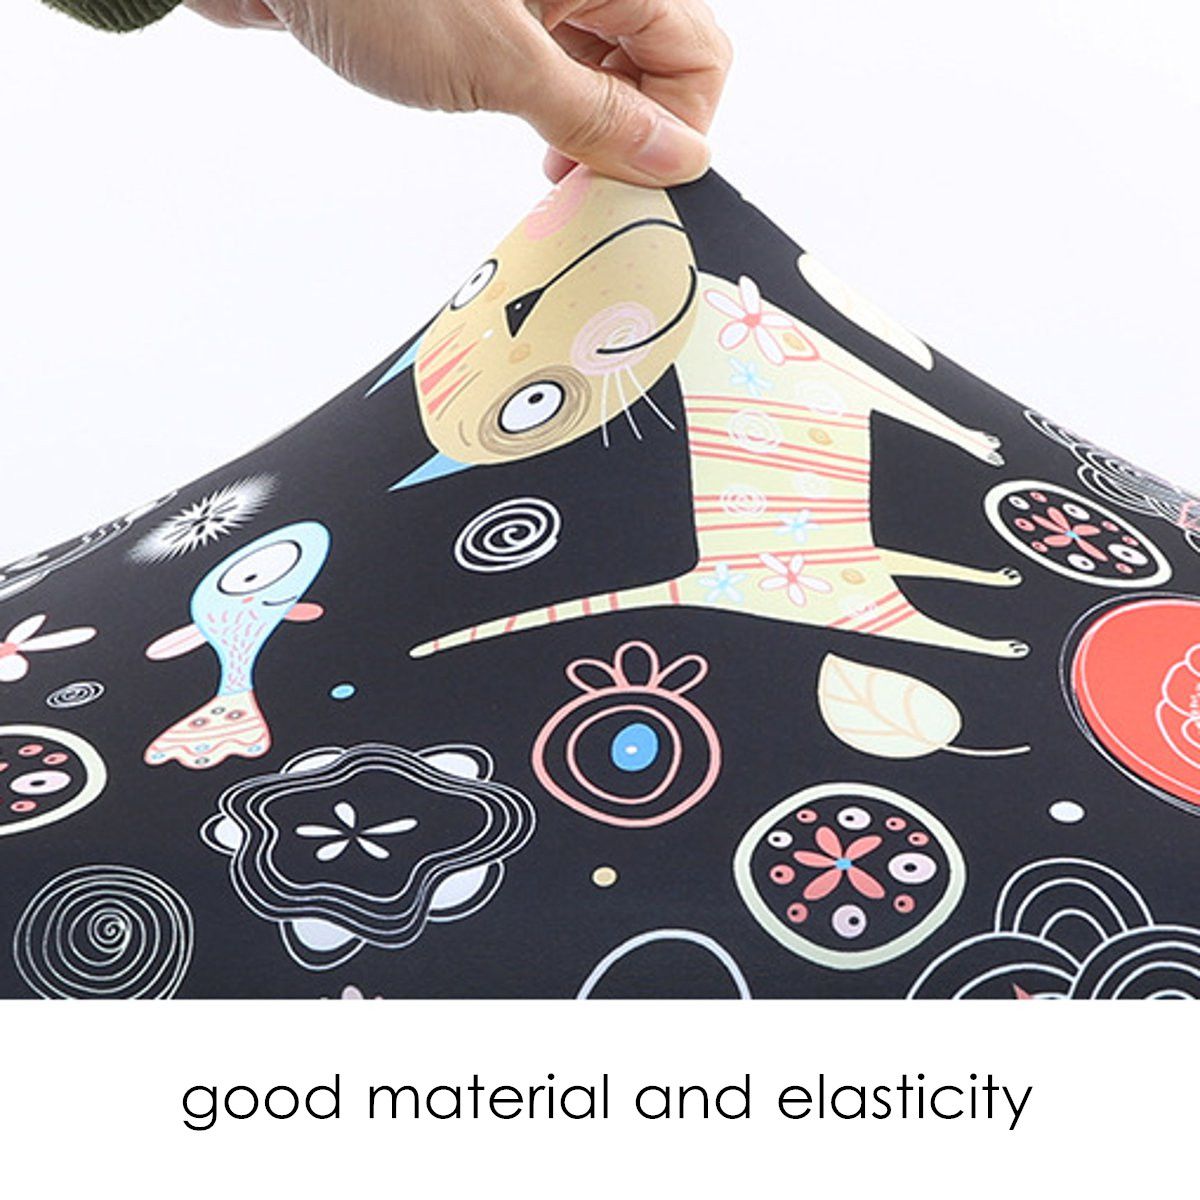 Multicolors-Elastic-Luggage-Cover-Travel-Suitcase-Protector-Dustproof-Protection-Case-Trolley-1465421